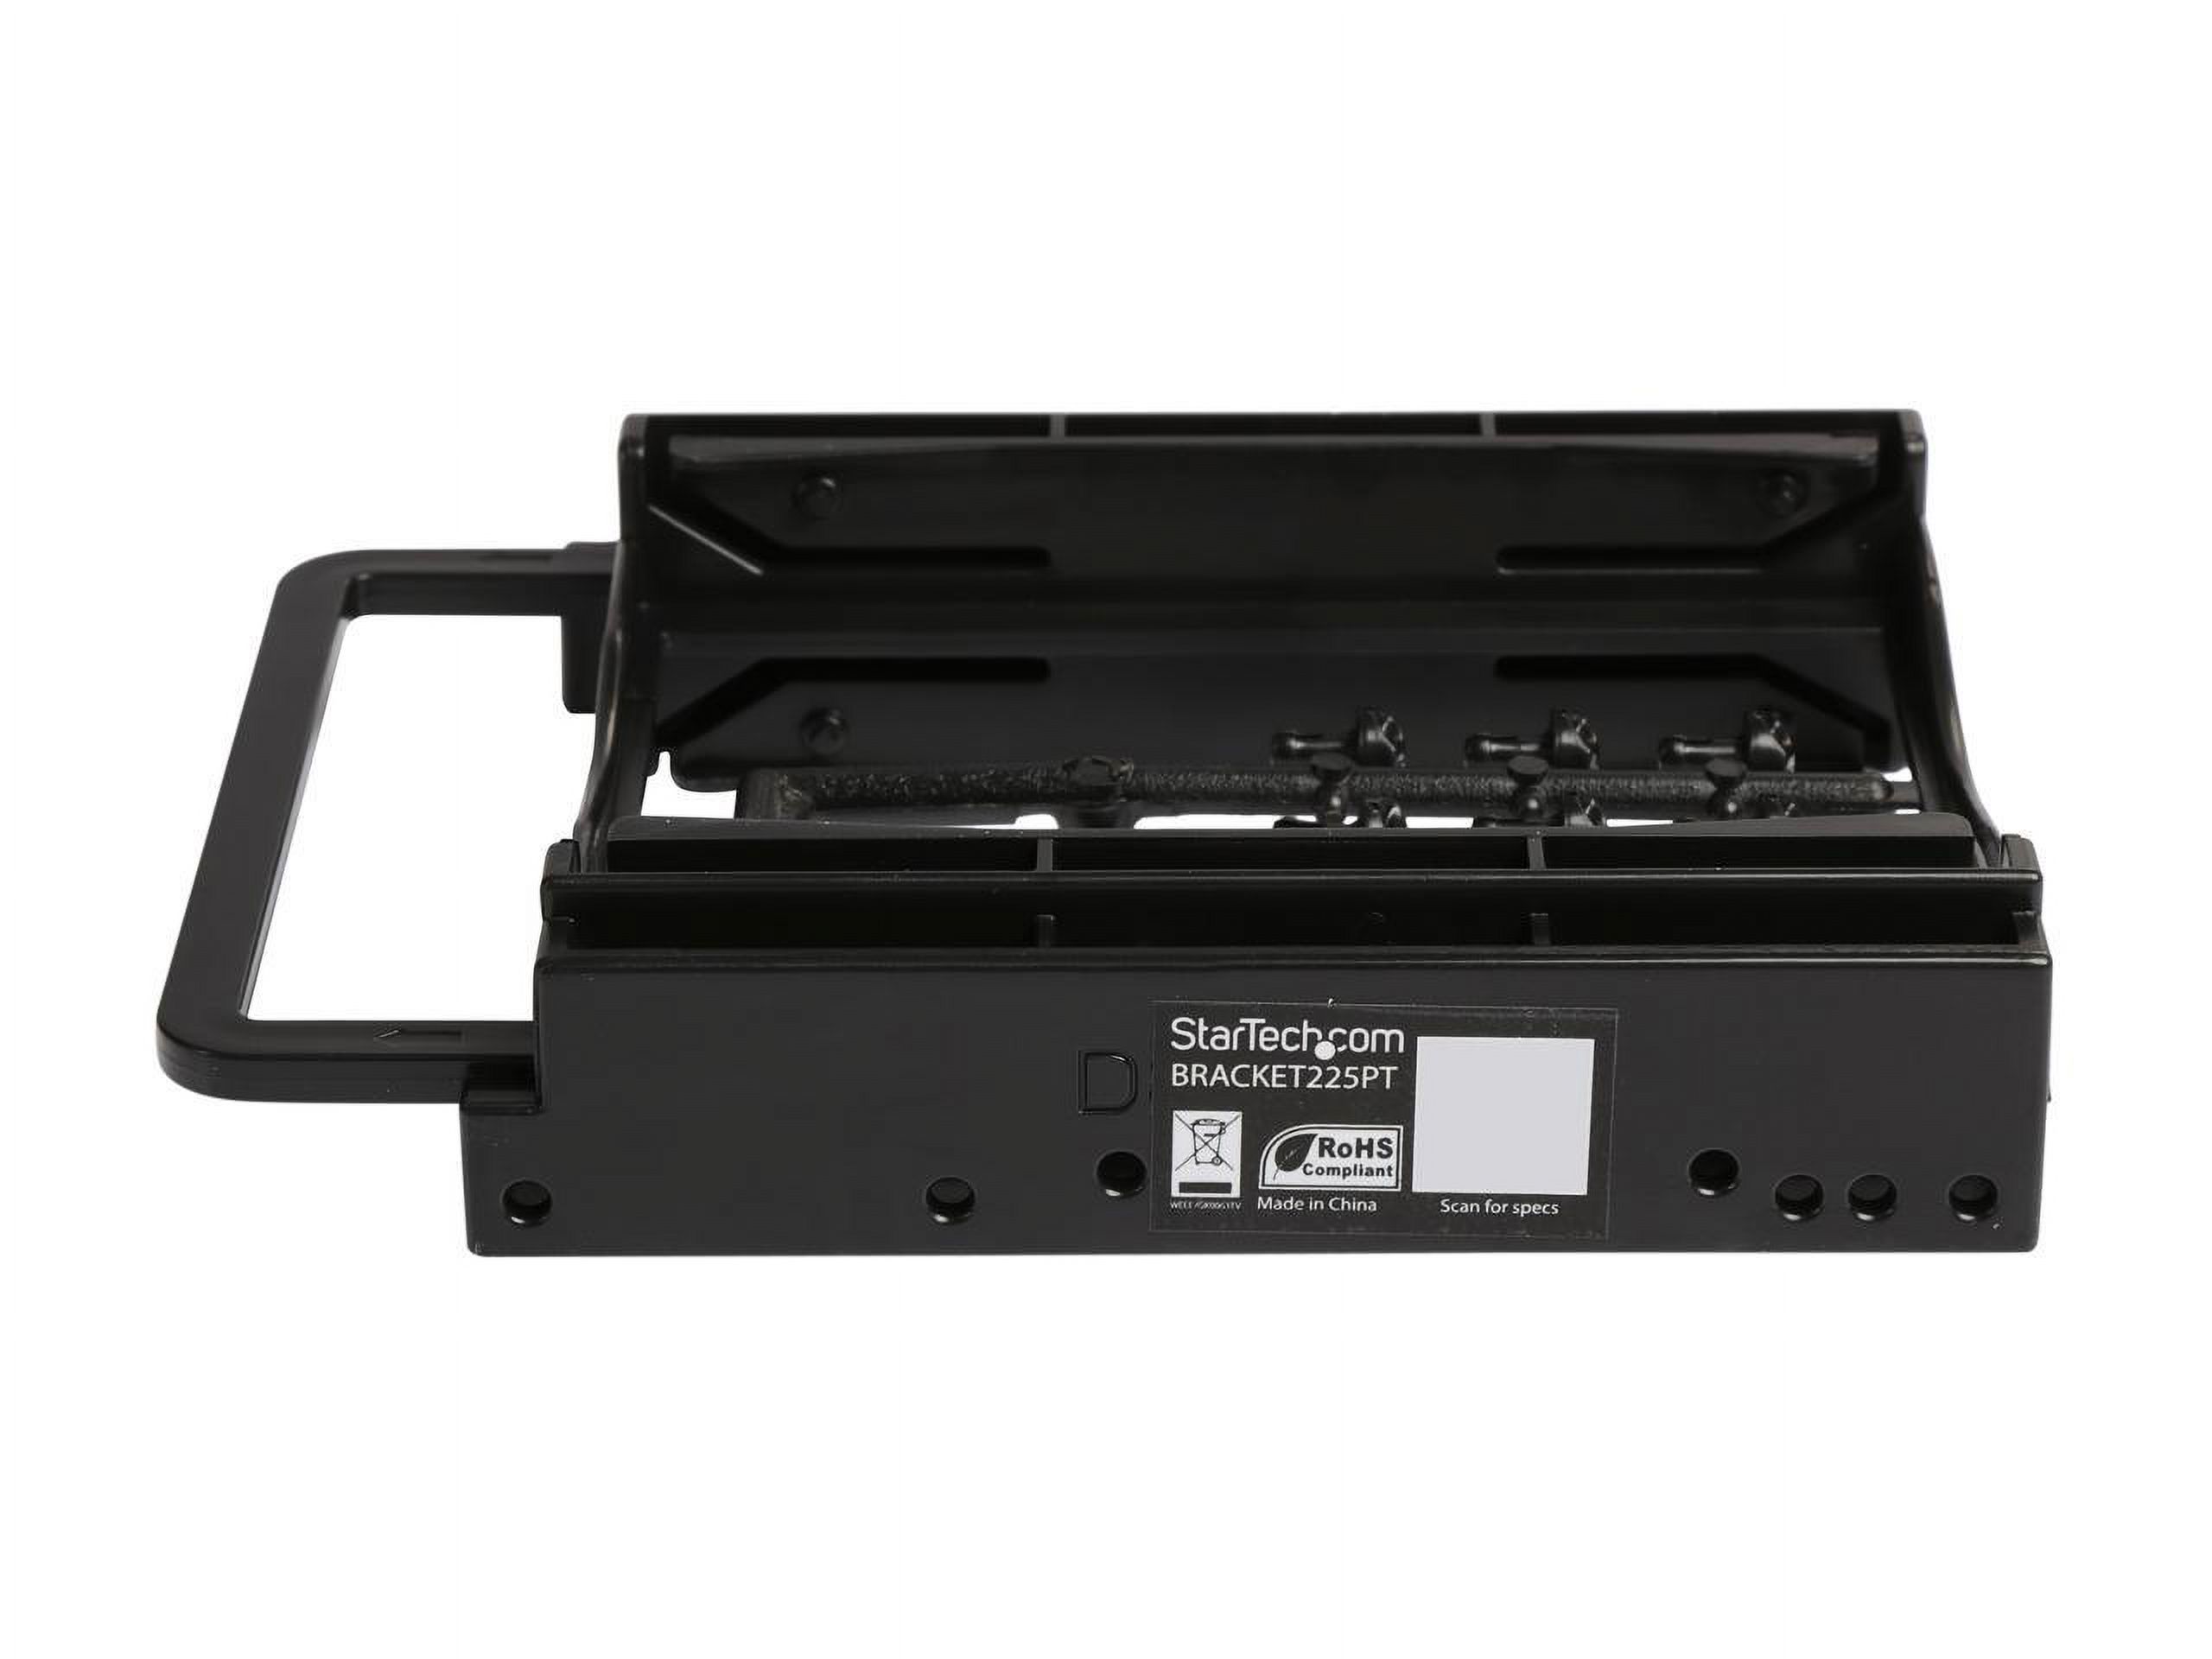 BRACKET225PT Dual 2.5in SSD/HDD Mounting Bracket for 3.5in Drive Bay - image 3 of 7